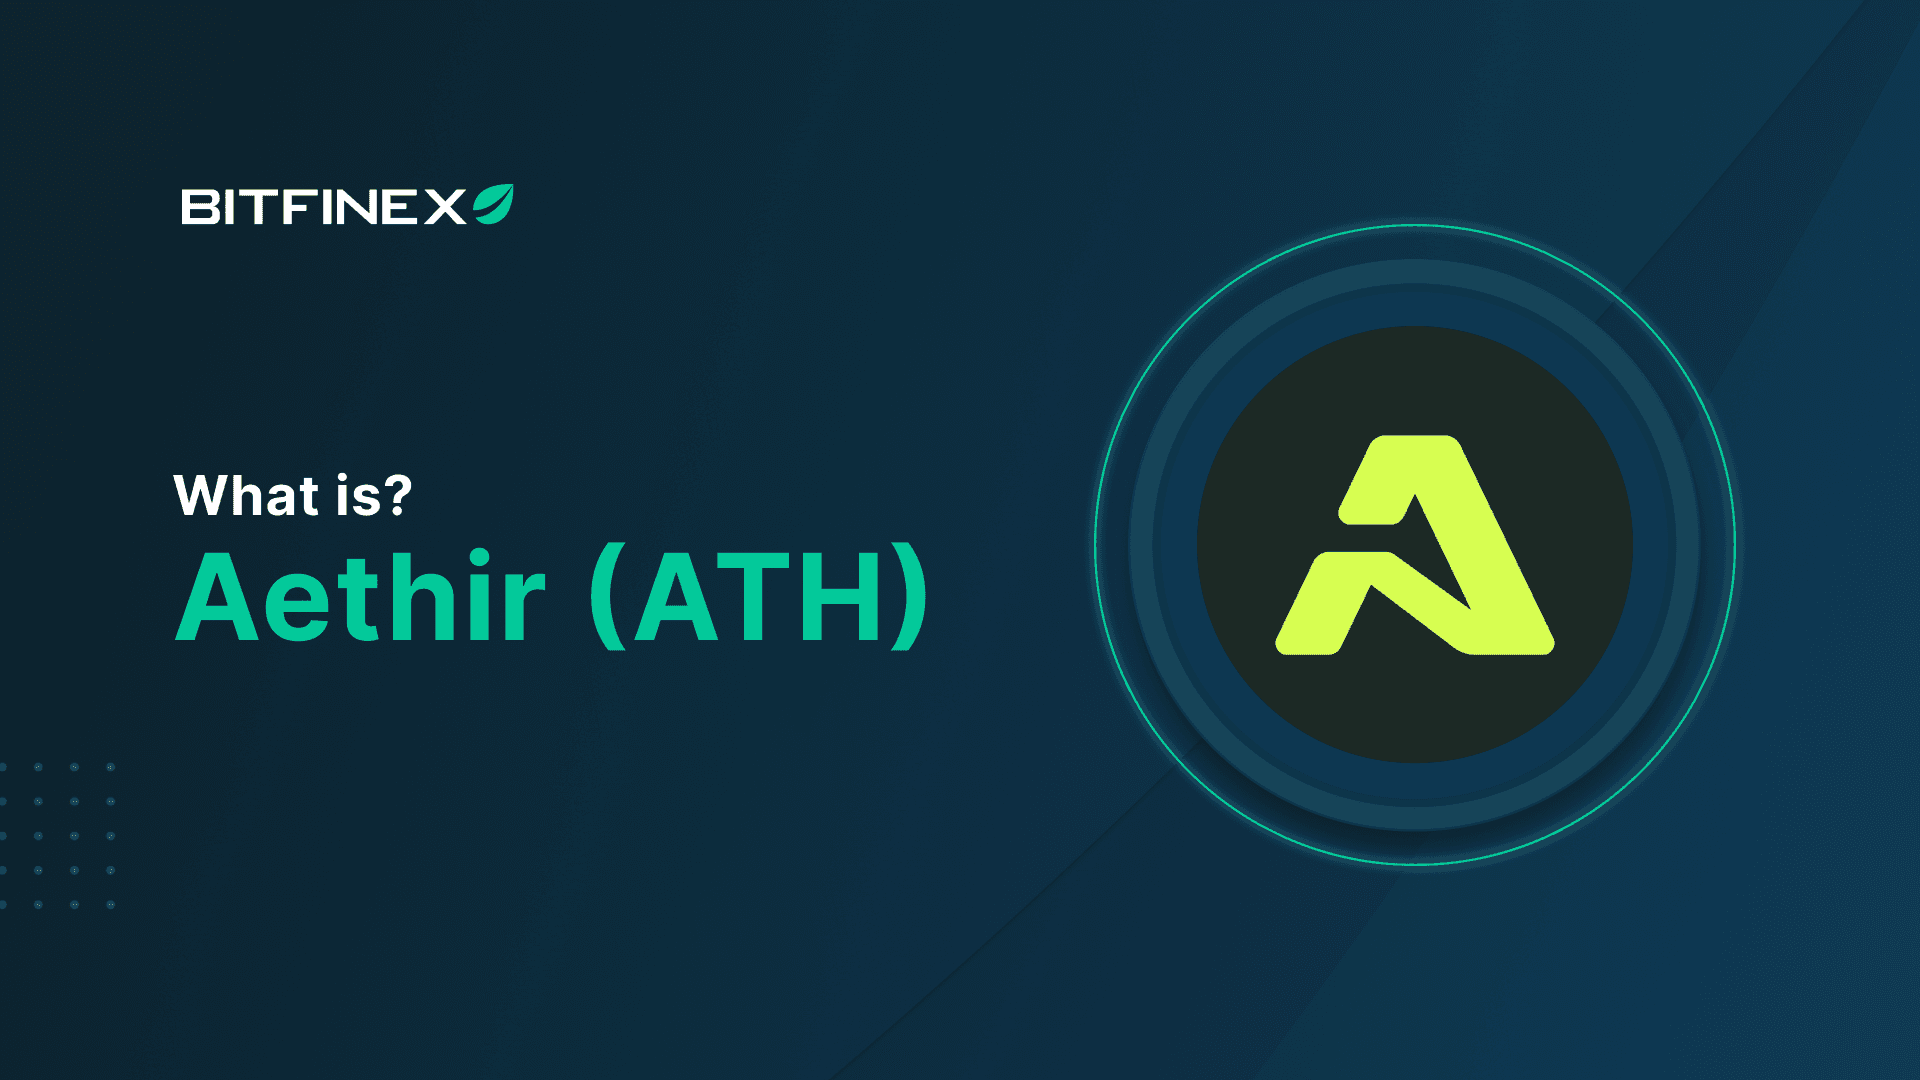 What is Aethir (ATH)?